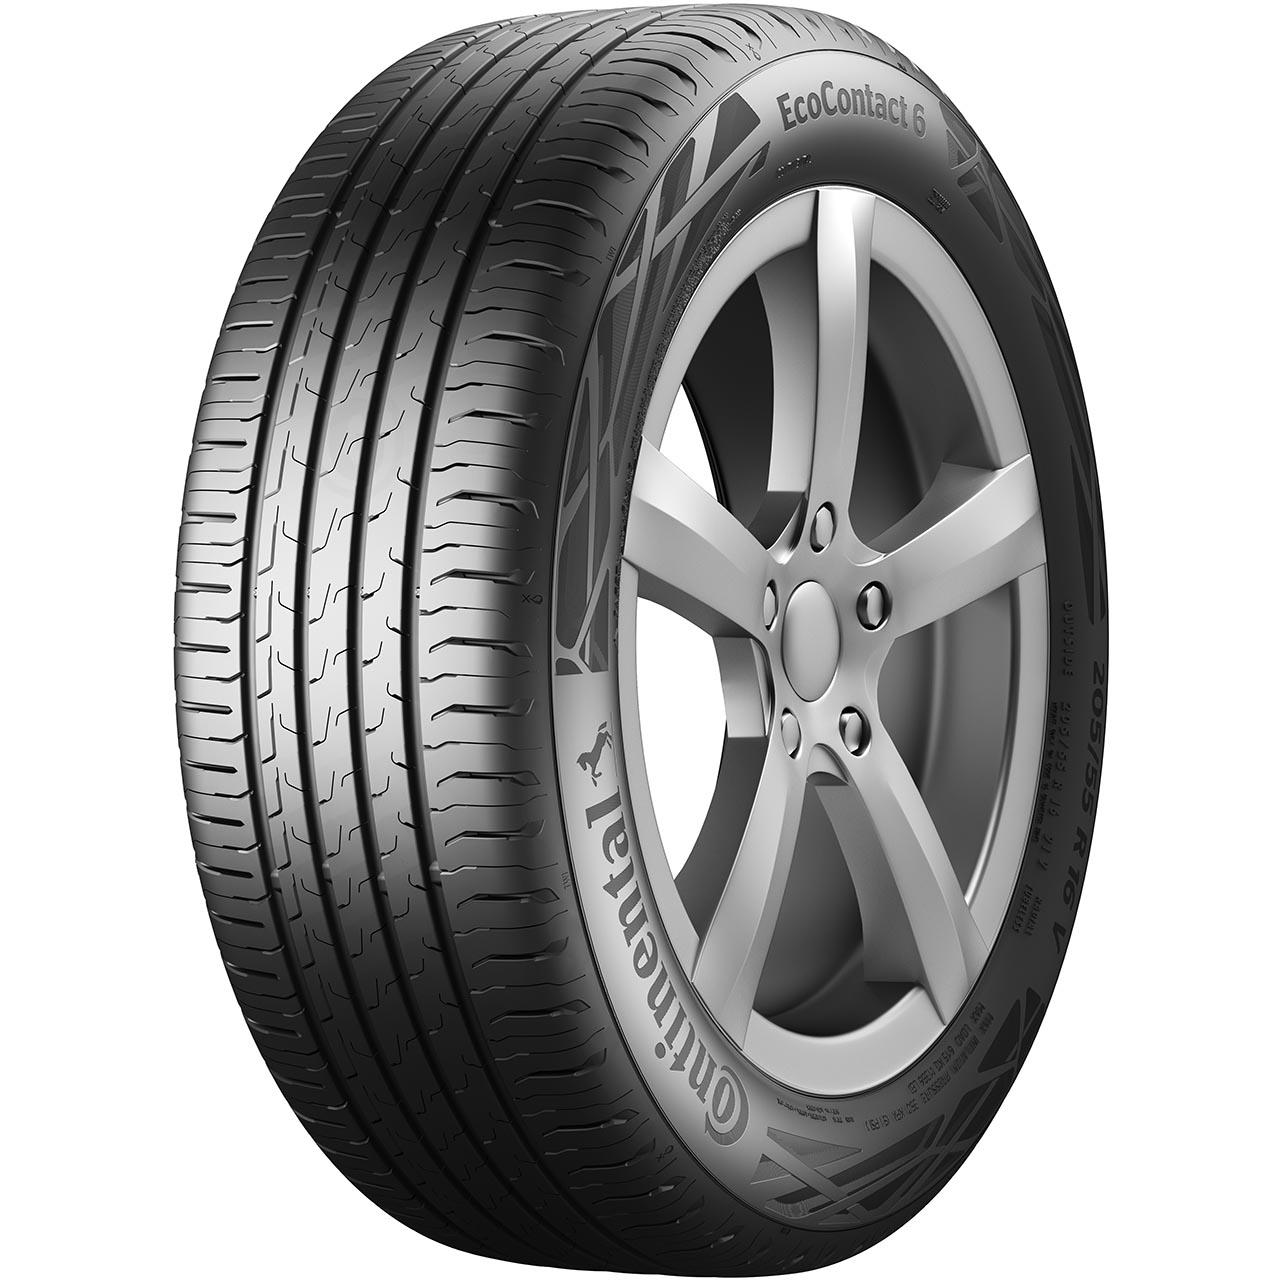 Continental ECOCONTACT 6 215/45R20 95T XL FR SEAL VW